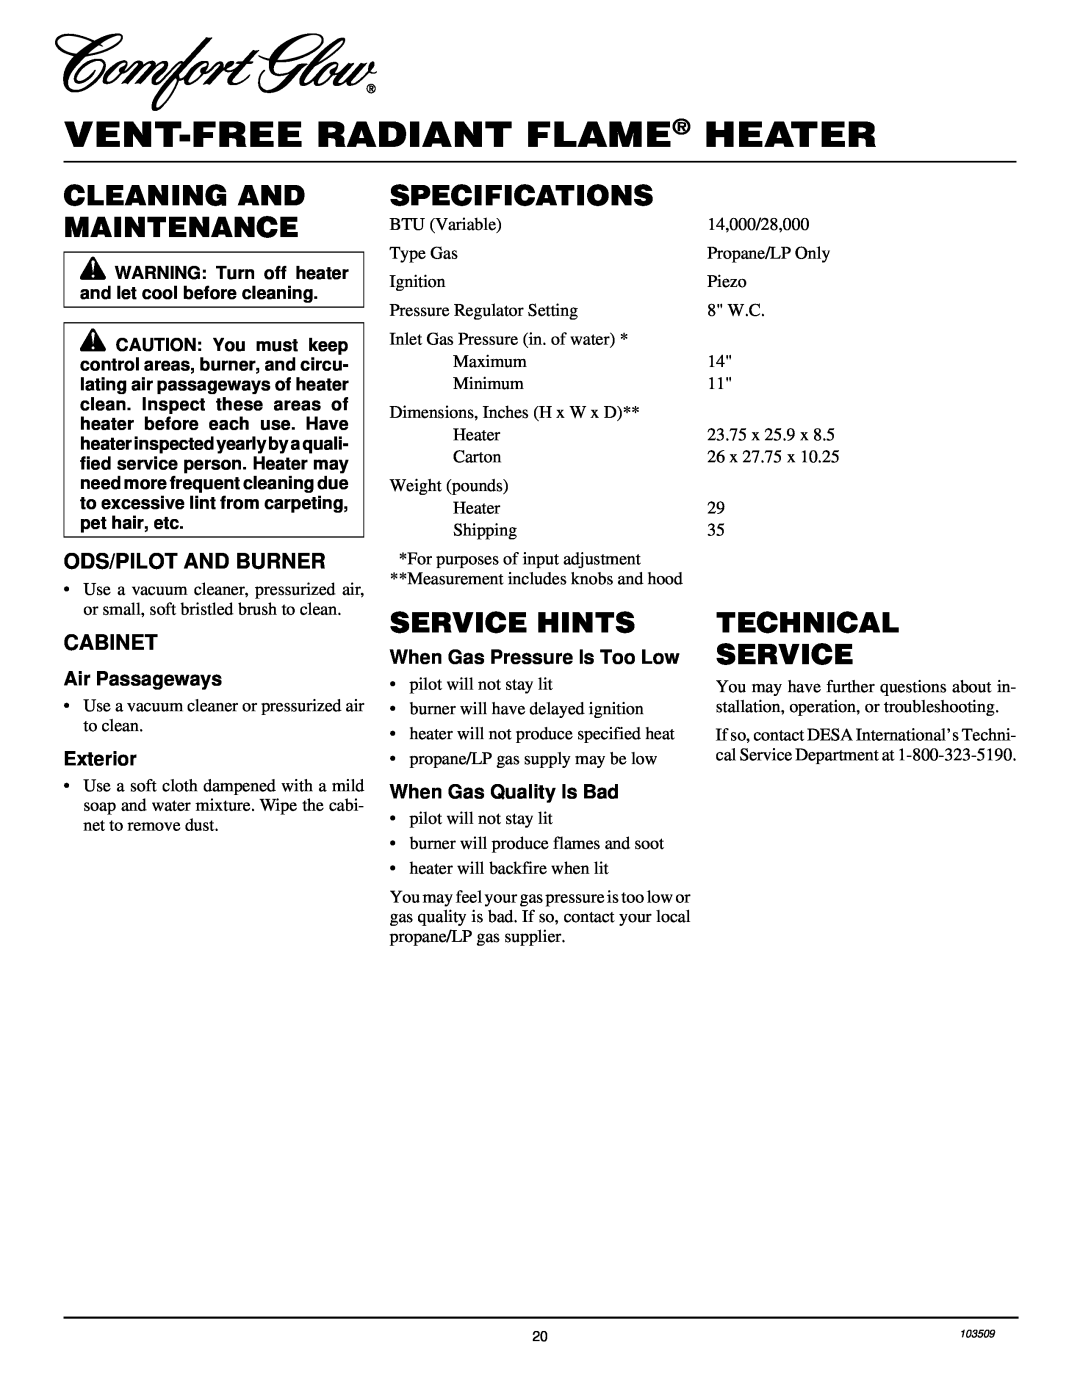 Desa Tech RFP28TC Cleaning And Maintenance, Specifications, Service Hints, Technical Service, Ods/Pilot And Burner 